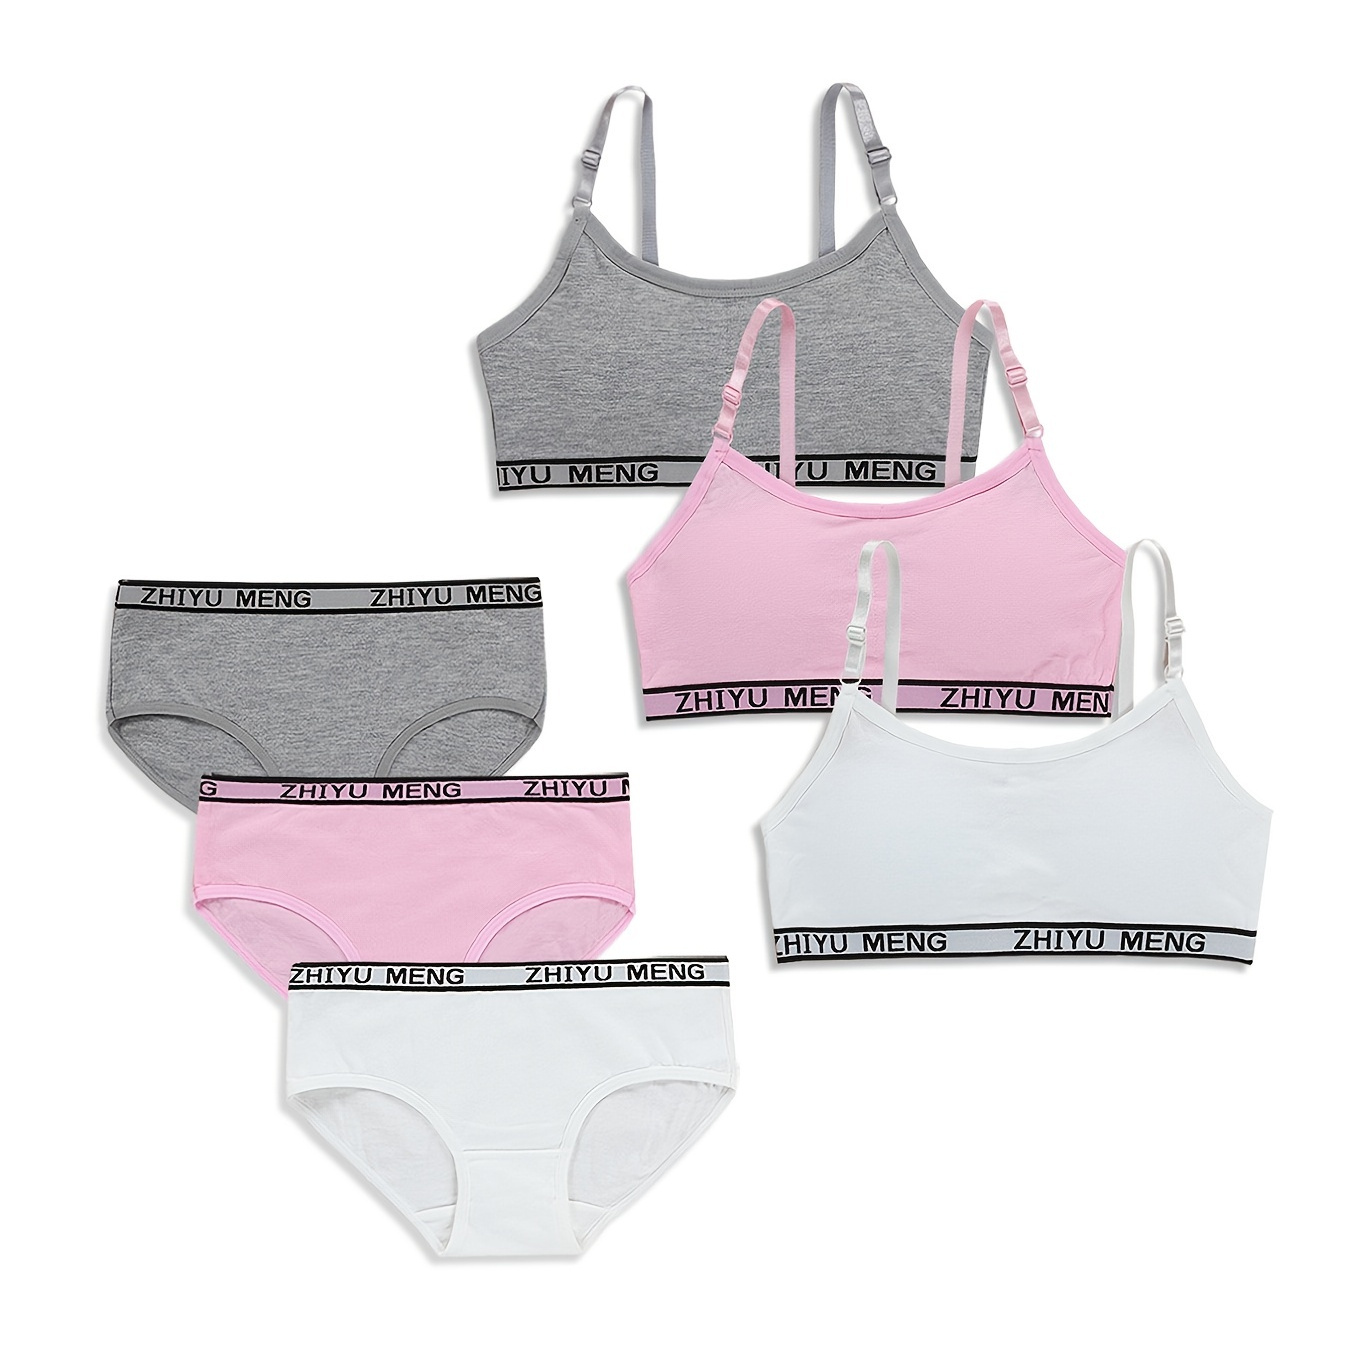 Teens Young Girls 2pcs Sports Underwear Set Smile Letters Print